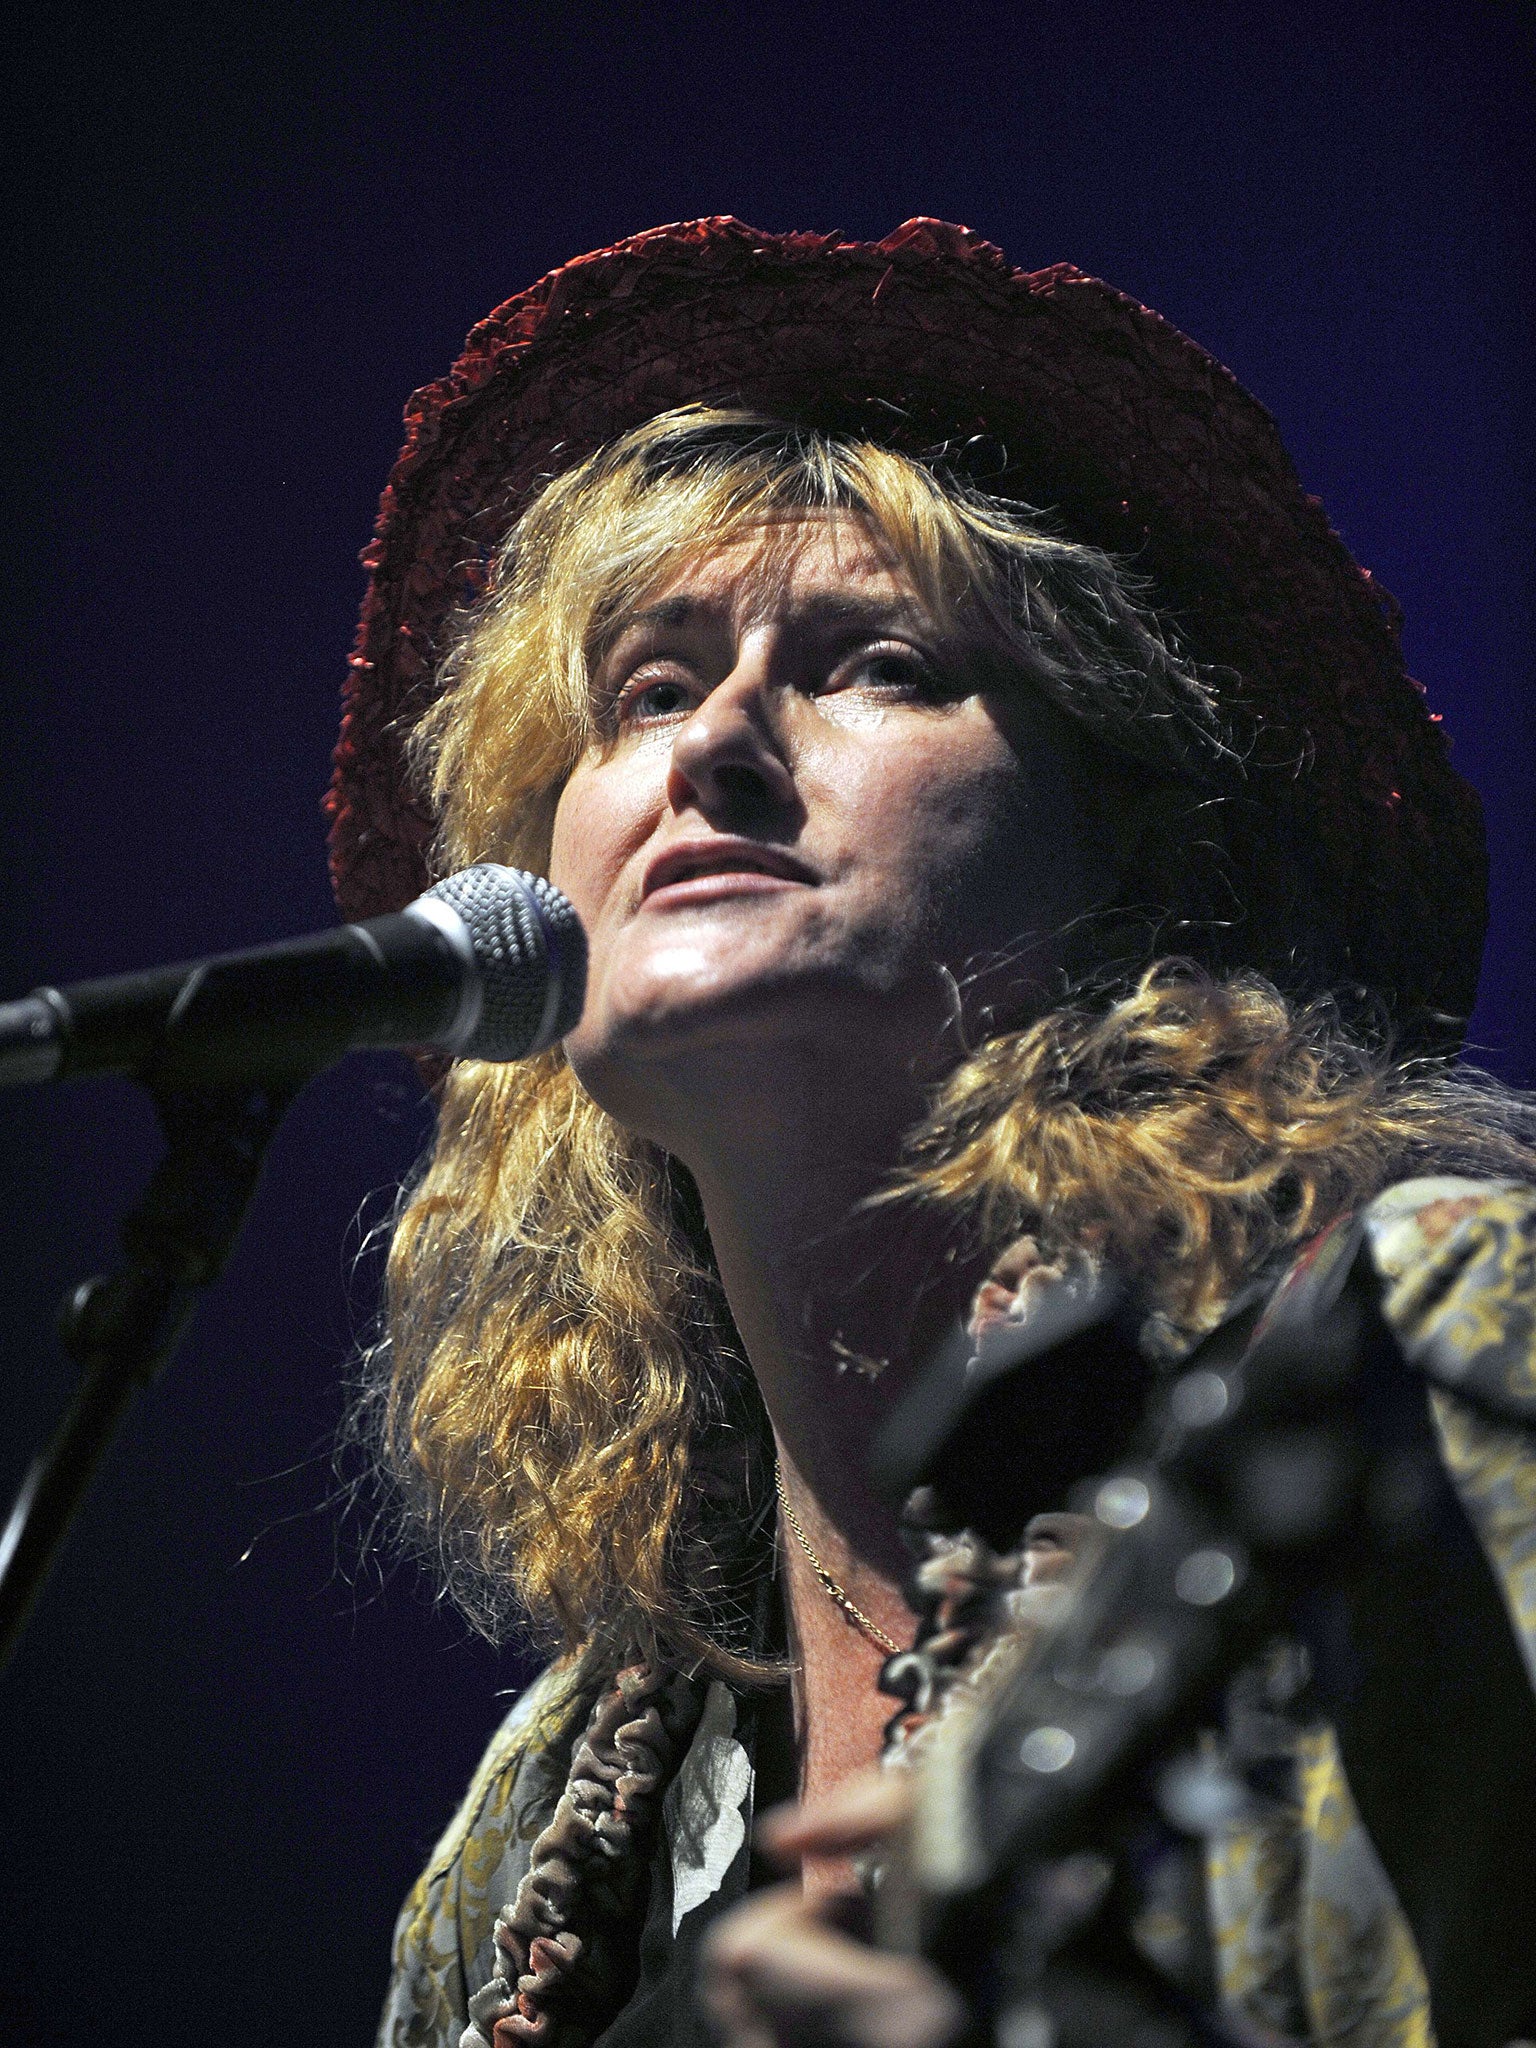 Eddi Reader performed a song she had the previous morning